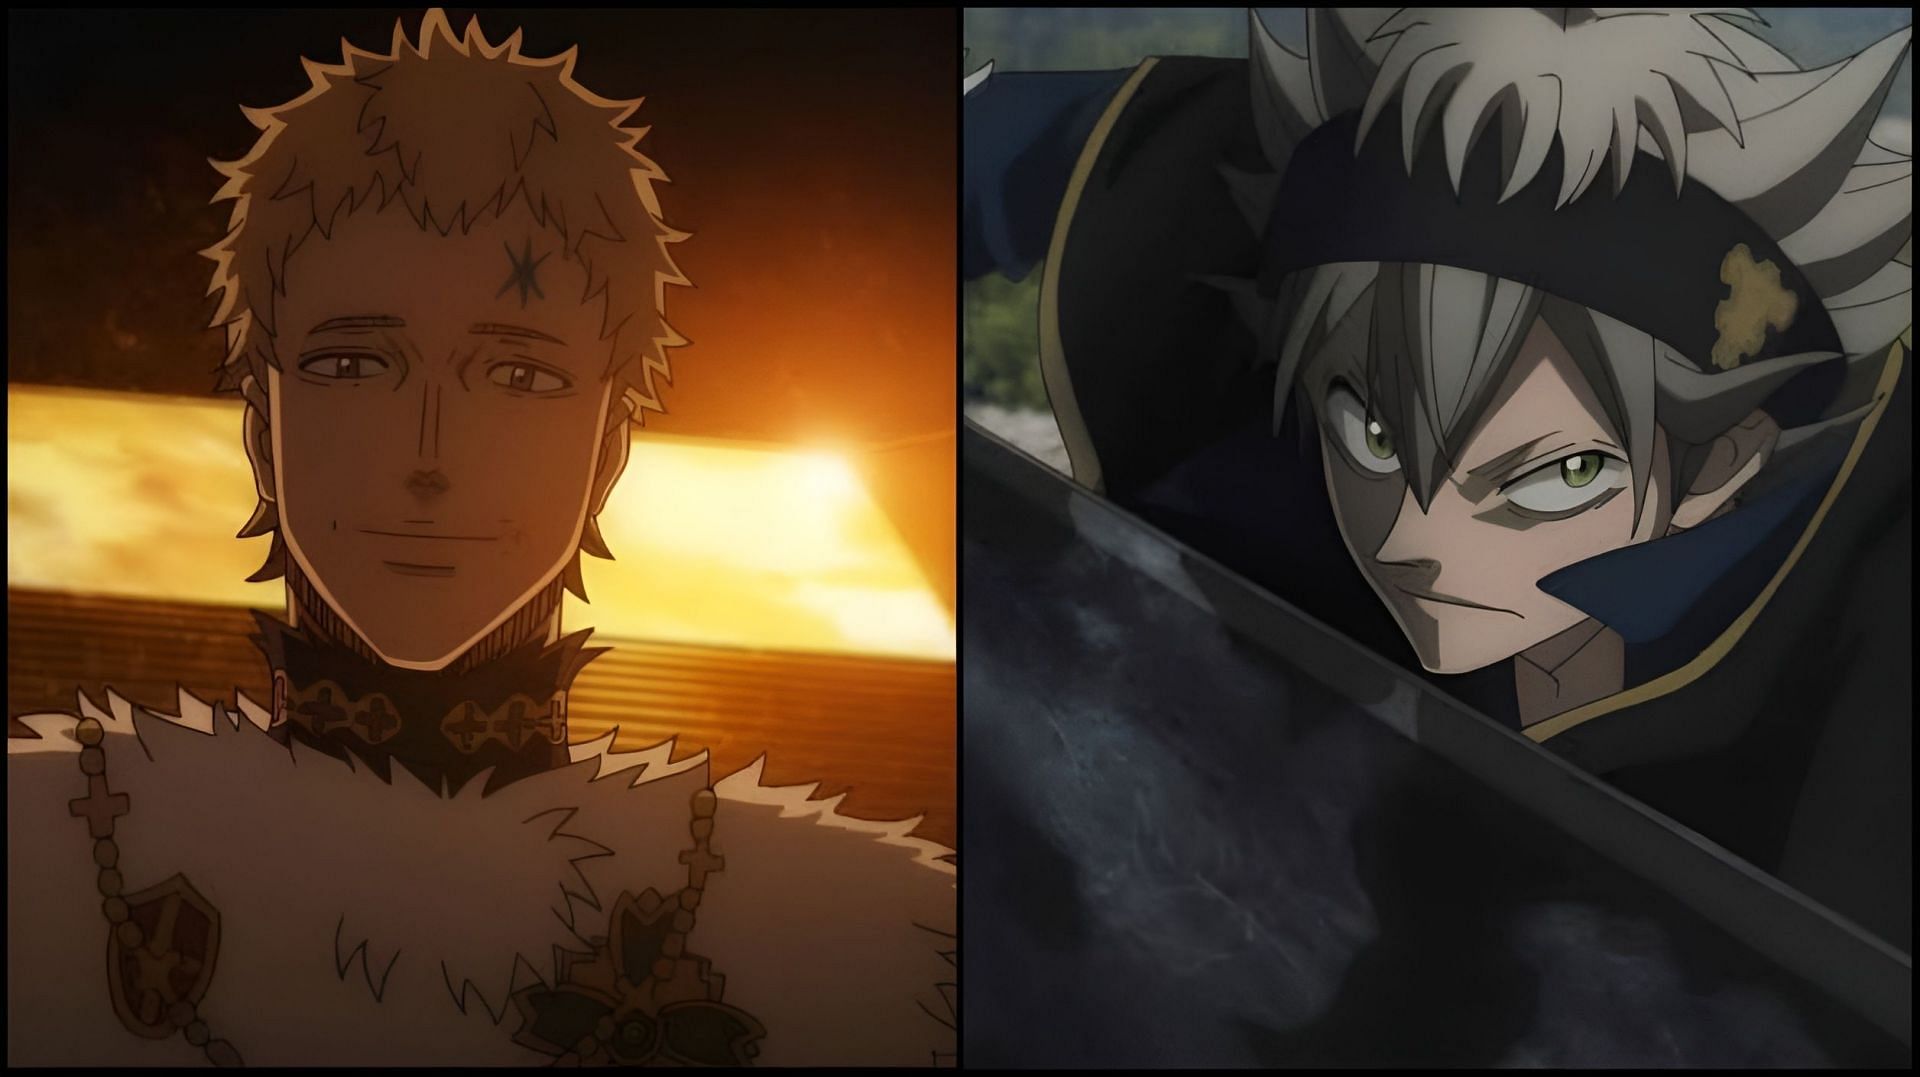 Asta and Lucius may go head to head in Black Clover Chapter 333 (Image via Studio Pierrot)